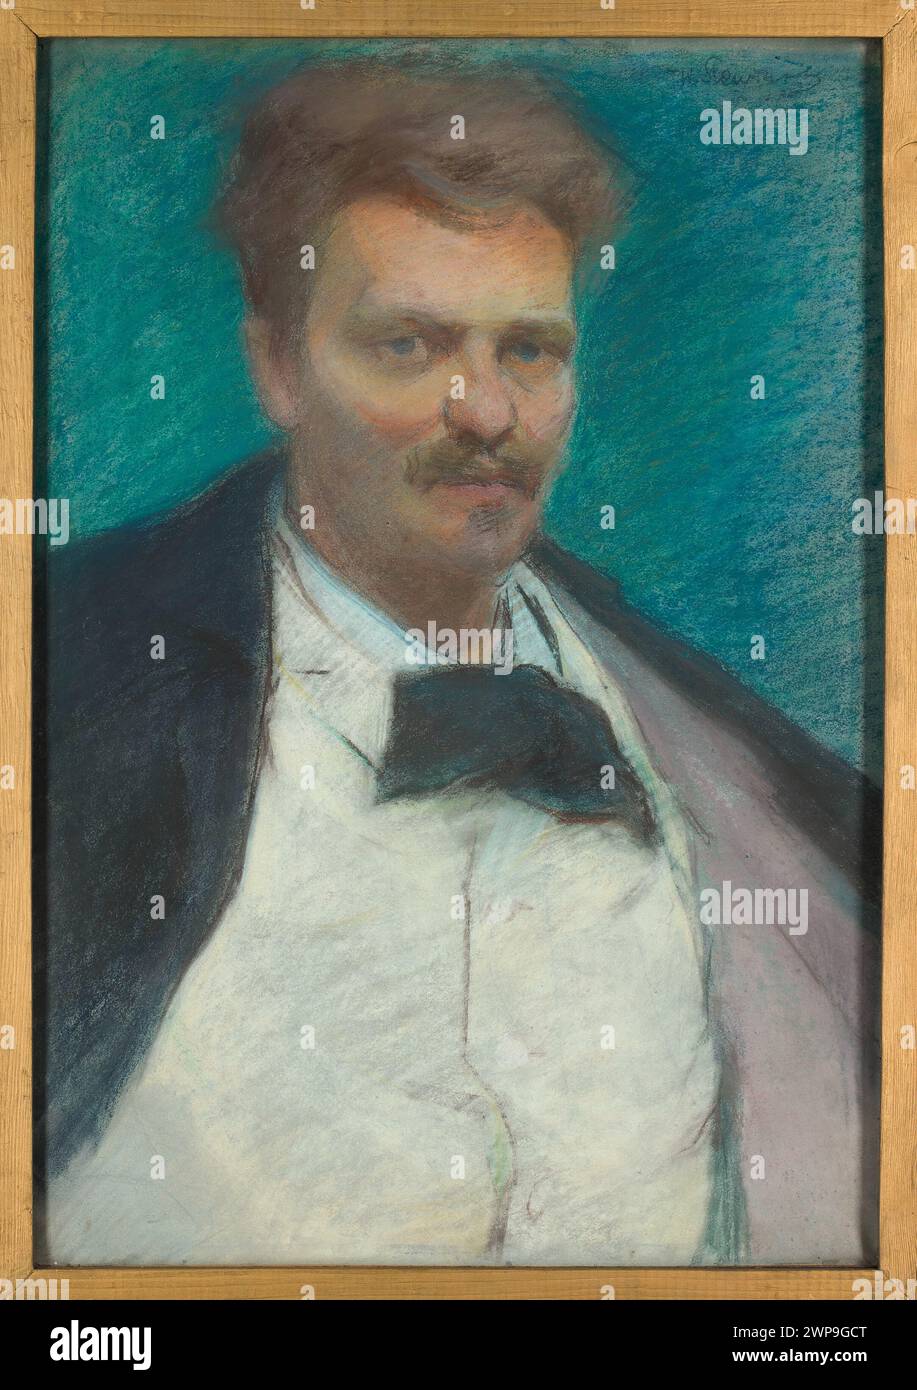 Portrait of August Strindberg; Lewy, W Adys Aw (1854 cars 1856-1918); around 1896 (1890-00-00-1896-00-00);Strindberg, Johann August (1849-1912), Strindberg, Johann August (1849-1912)-iconography, Swedes, dramaturists, writers, Polish pastels, writers, Poland (culture), portraits, male portraits, men's portraits, purchase (provenance) Stock Photo